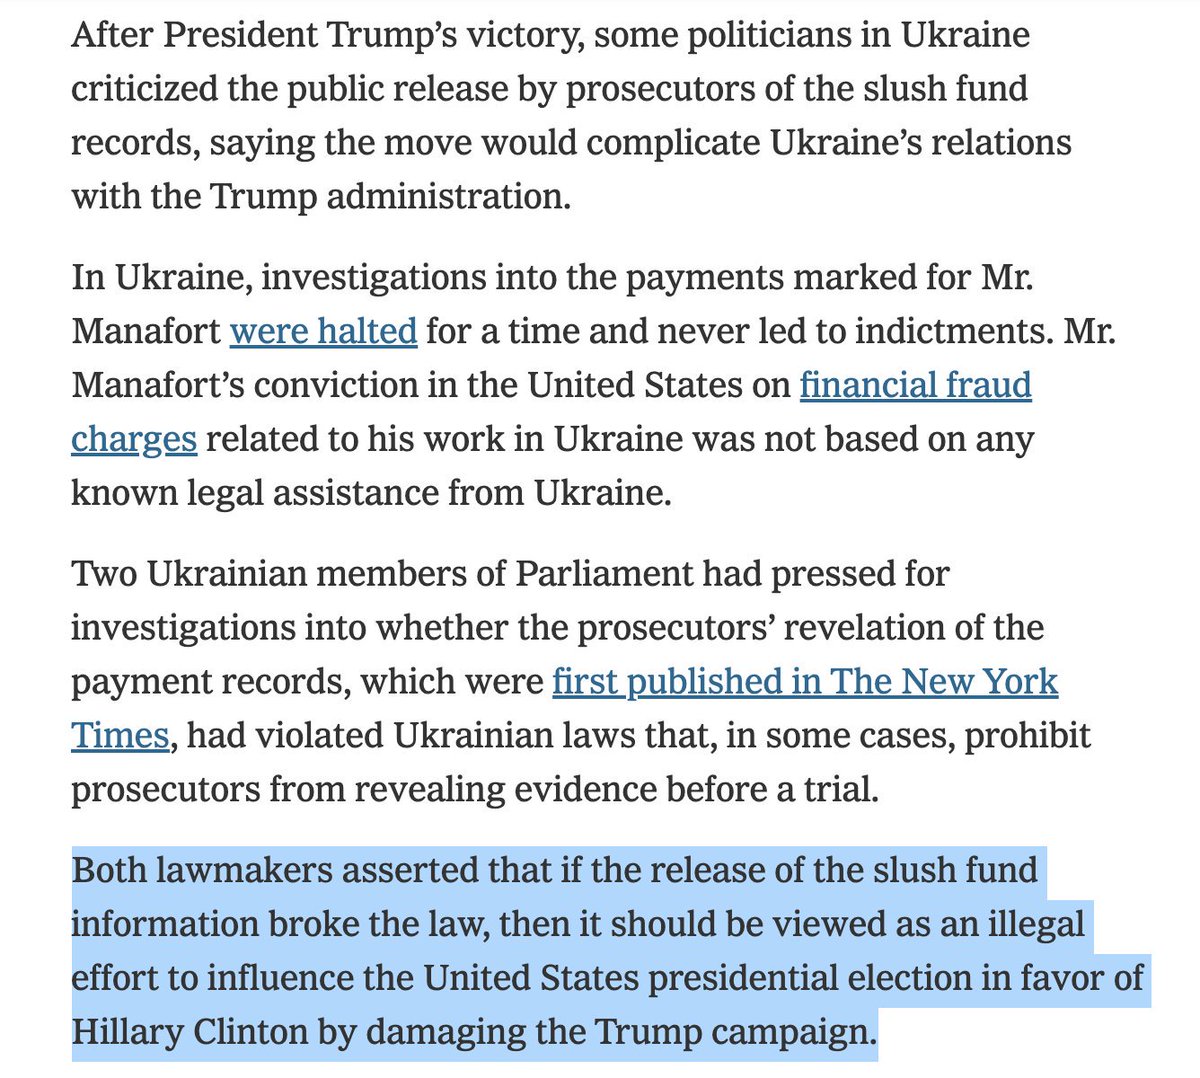 The New York Times, Dec. 12, 2018: "Ukraine Court Rules Manafort Disclosure Caused ‘Meddling’ in U.S. Election"